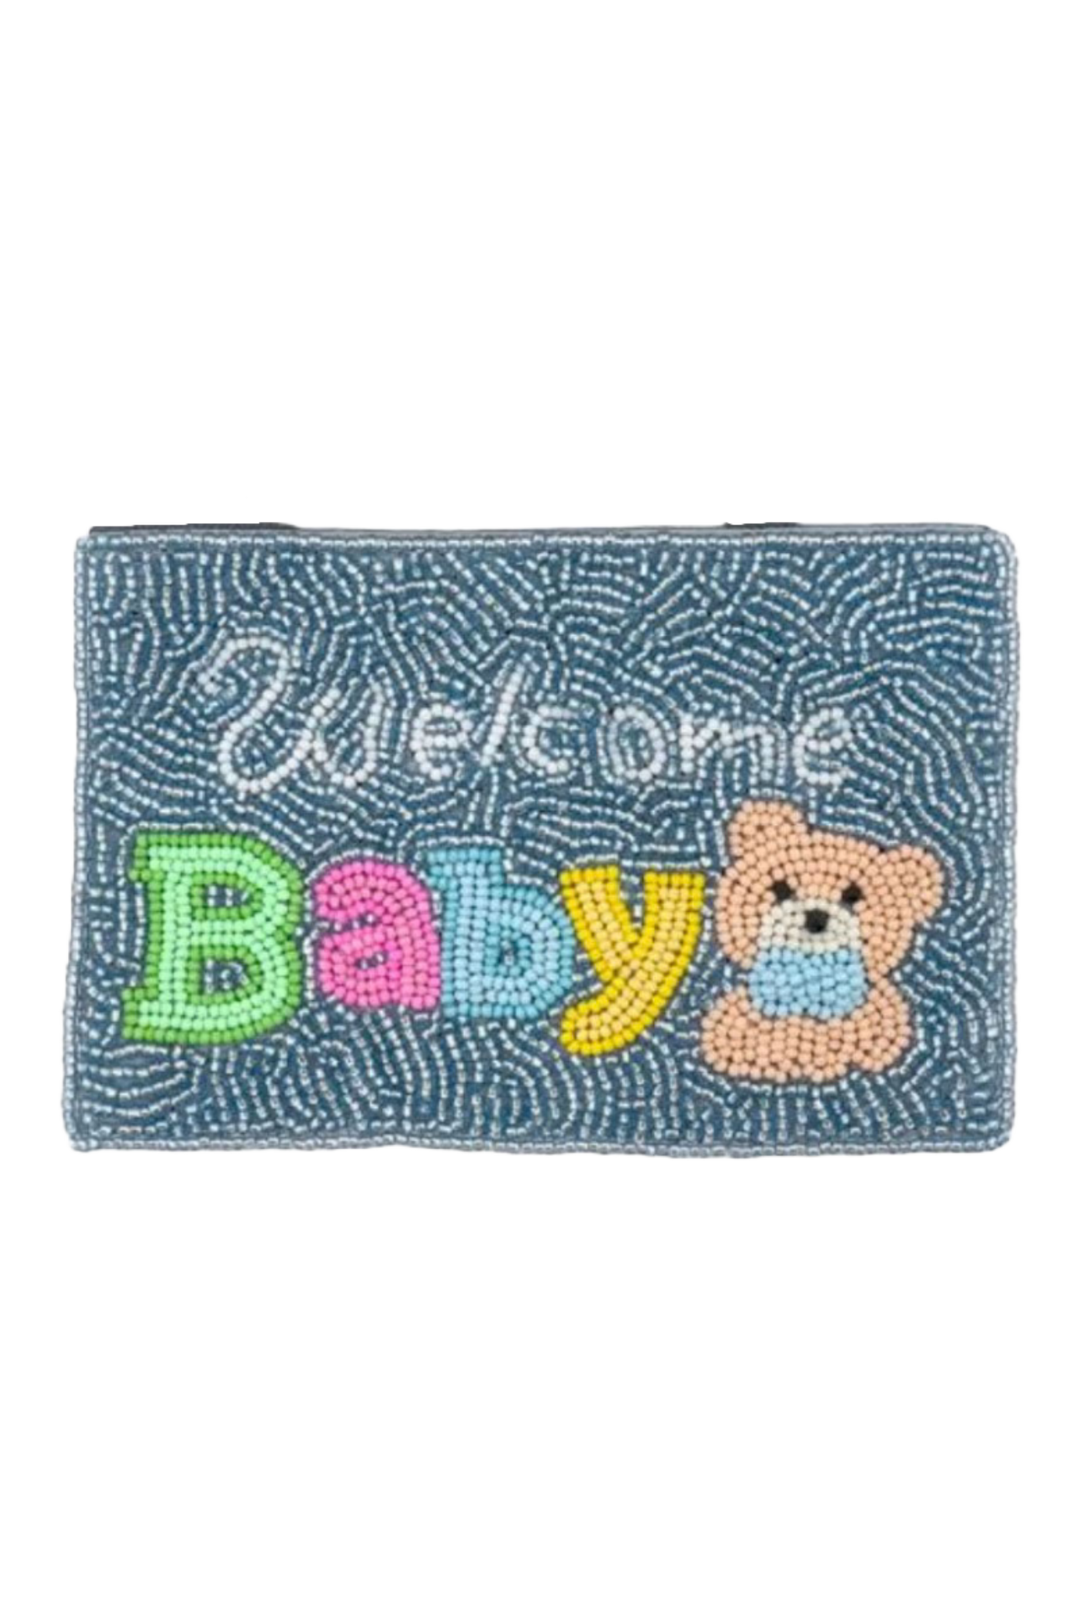 "Welcome Baby" Coin Purse- Blue